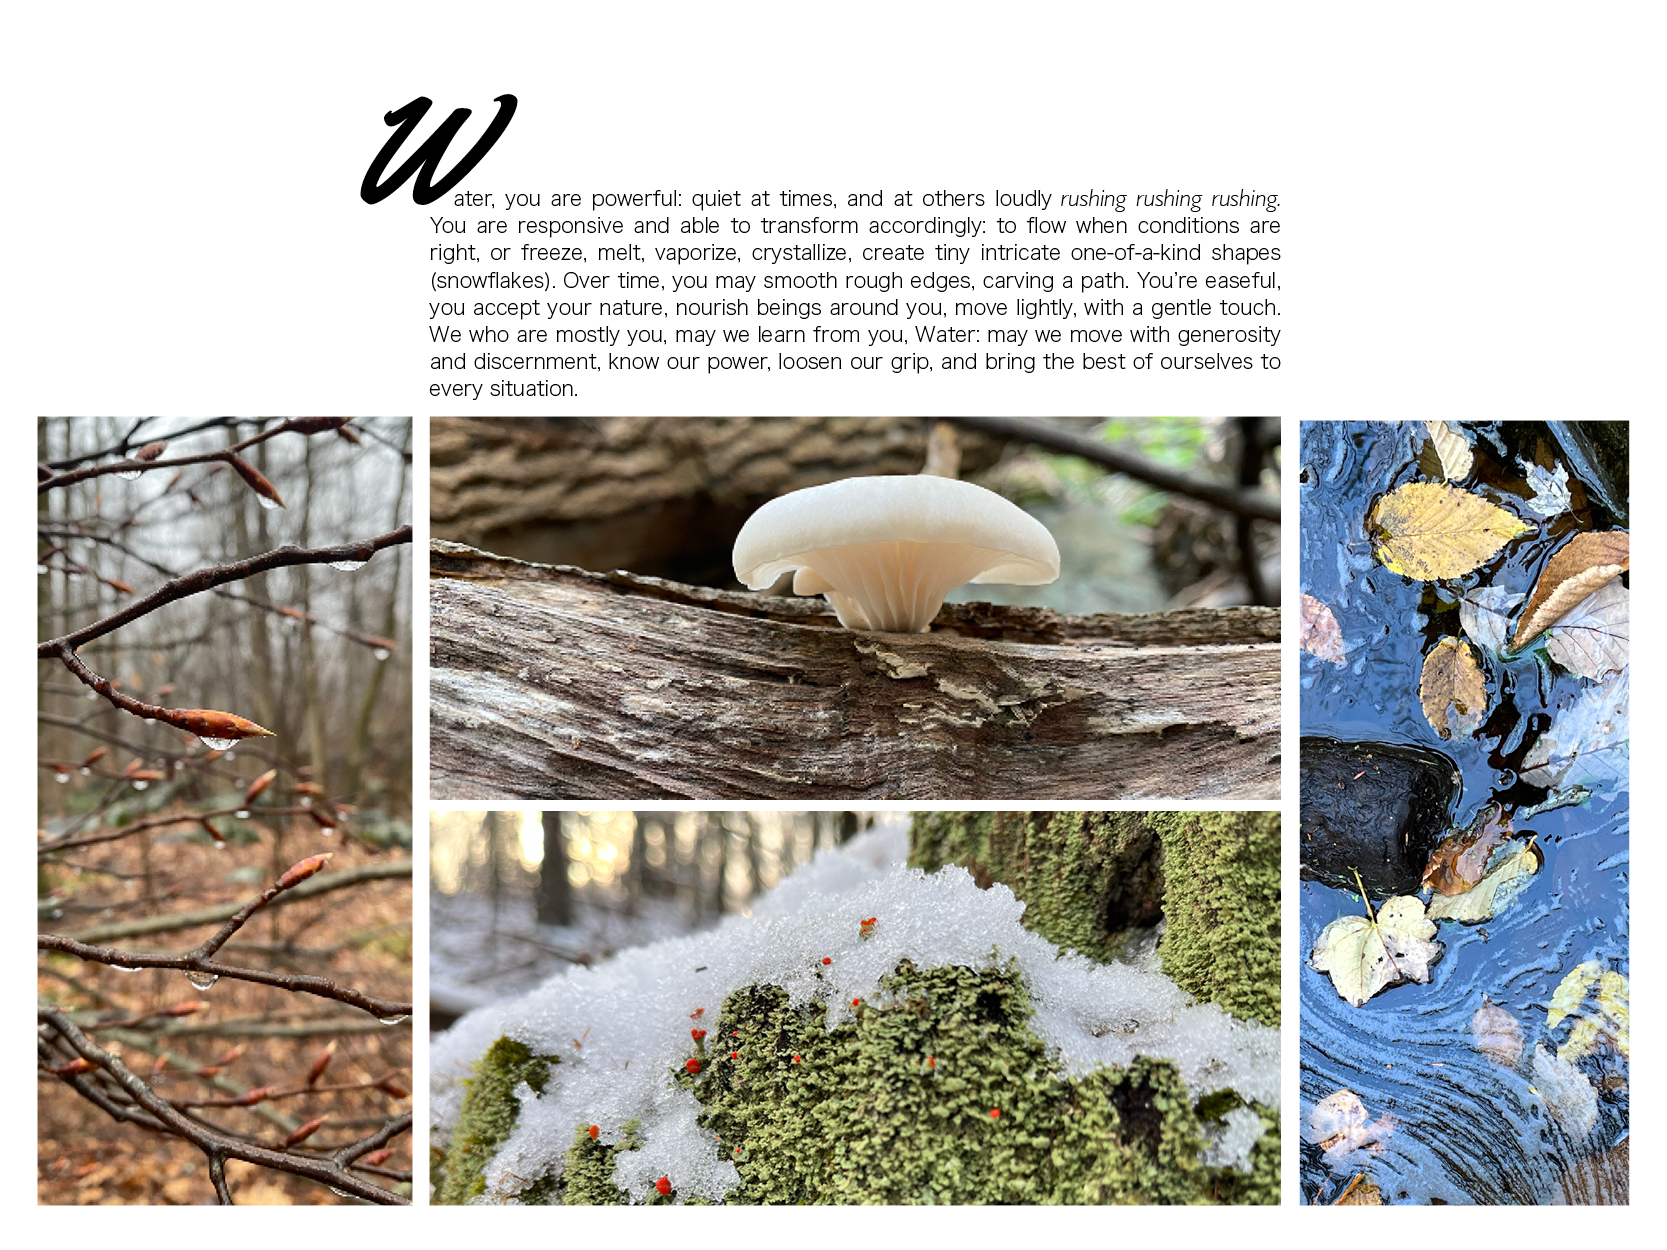 "Ode to Tubig" has four color photos and one prose poem in English. Each photo shows a forest scene with water in one of the forms water can be experienced during Spring, Summer, Fall, and Winter, the four seasons that can be experienced in the Northeastern part of what is now known as the United States of America, where the artist was born, raised, and currently lives. The poem says: Water, you are powerful: quiet at times, and at others loudly rushing rushing rushing. You are responsive and able to transform accordingly: to flow when conditions are right, or freeze, melt, vaporize, crystallize, create tiny intricate one-of-a-kind shapes (snowflakes). Over time, you may smooth rough edges, carving a path. You're easeful, you accept your nature, nourish beings around you, move lightly, with a gentle touch. We who are mostly you, may we learn from you, Water: may we move with generosity and discernment, know our power, loosen our grip, and bring the best of ourselves to every situation.